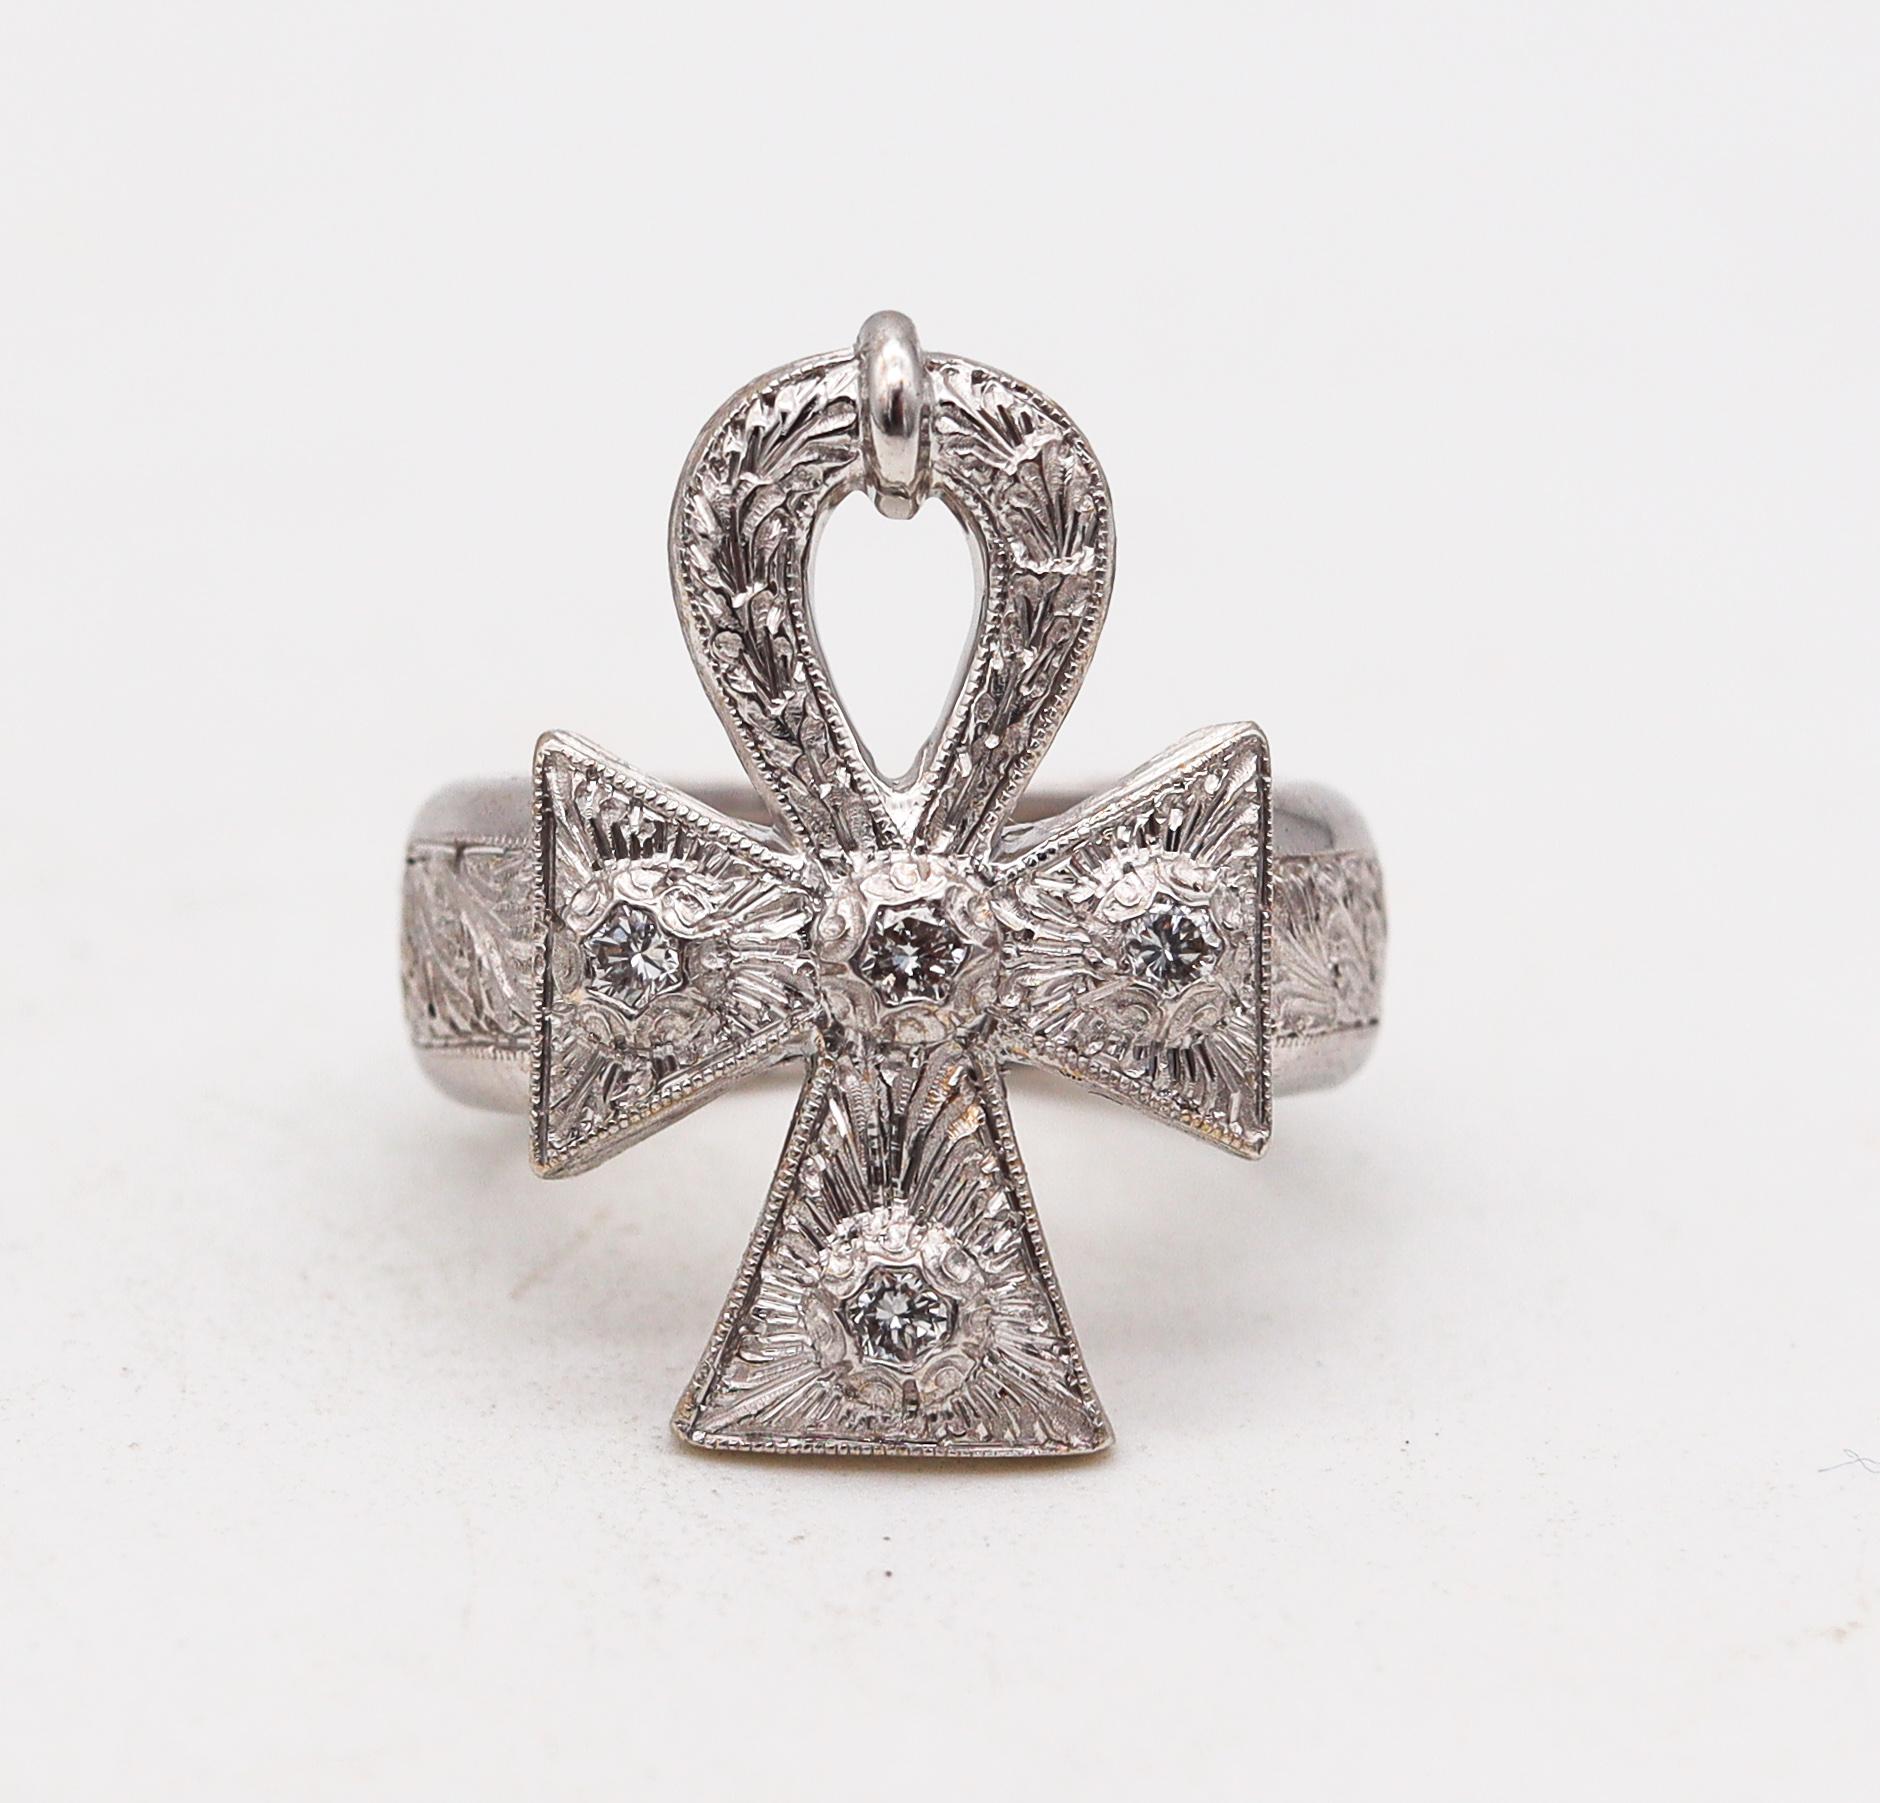 Cocktail ring with Ankh designed by Cazzaniga.

Beautiful cocktail ring with Ankh cross motif, created in Roma Italy by the fine jewelry house of Cazzaniga. This intricate piece have been crafted with baroque revival patterns in solid white gold of